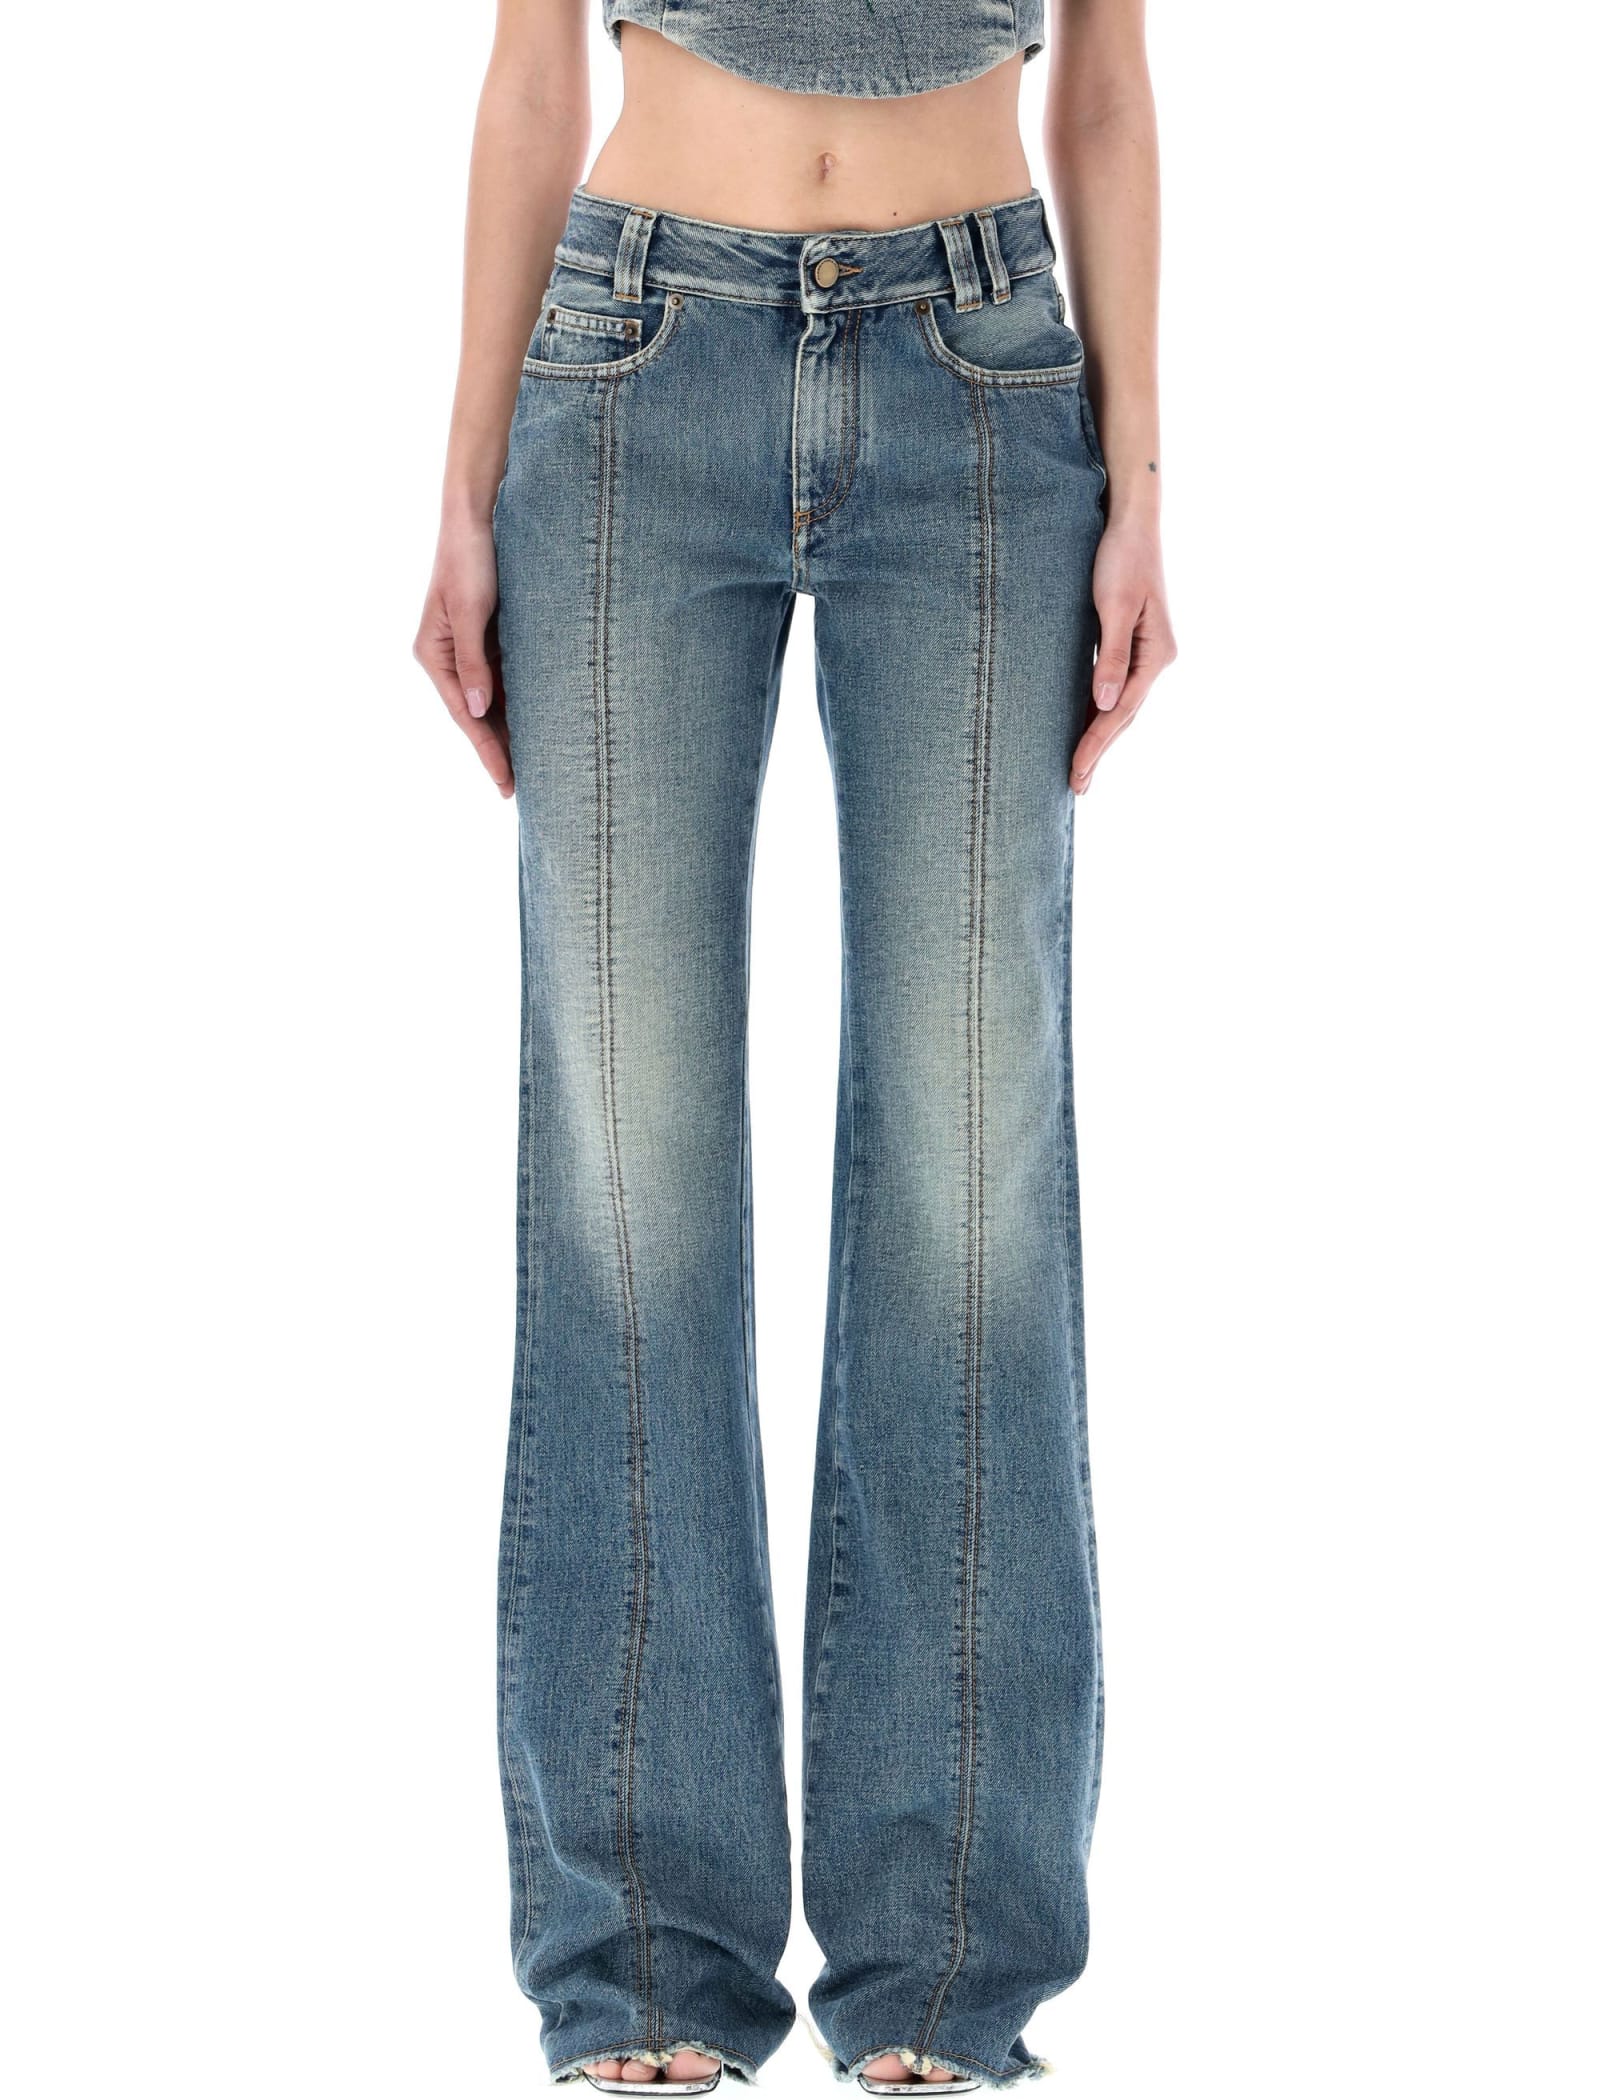 ALESSANDRA RICH DENIM FLARED JEANS WITH CRYSTAL ROSE